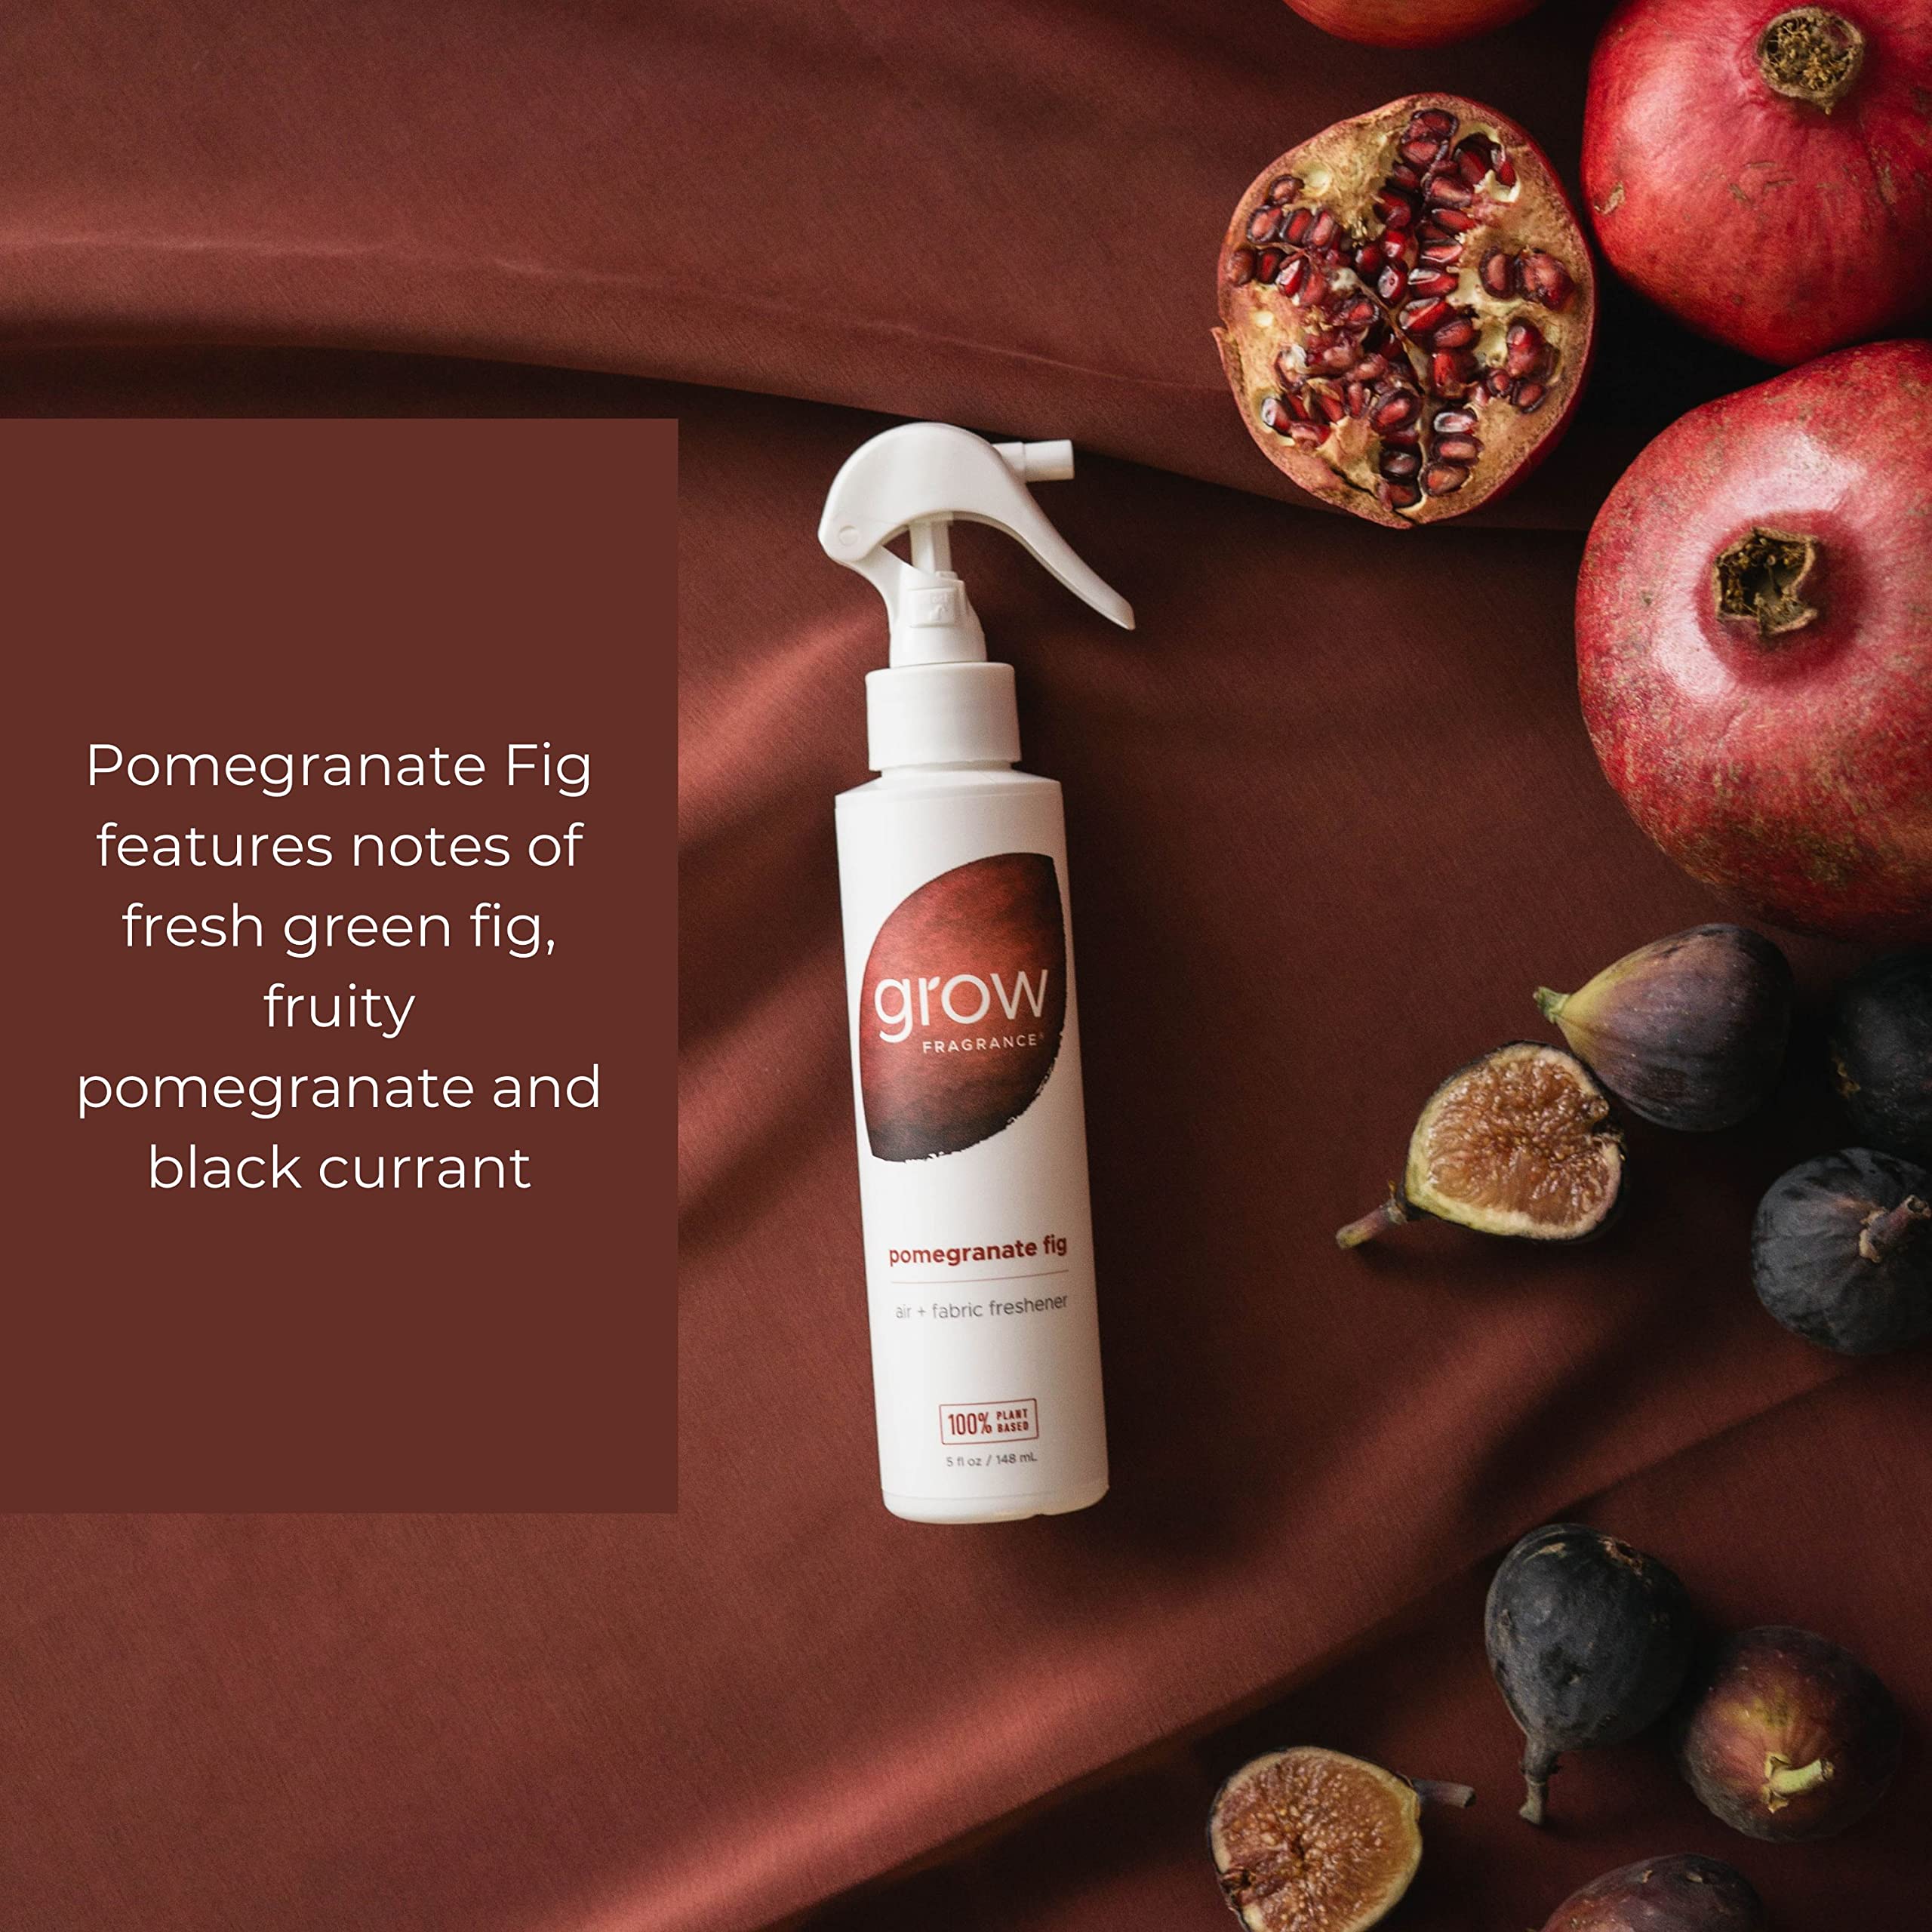 Grow Fragrance - Certified Non Toxic, 100% Plant Based Fabric and Room Air Freshener Spray. Made with All Natural Essential Oils -Pomegranate Fig Scent - Great Deodorizer Odor Eliminator